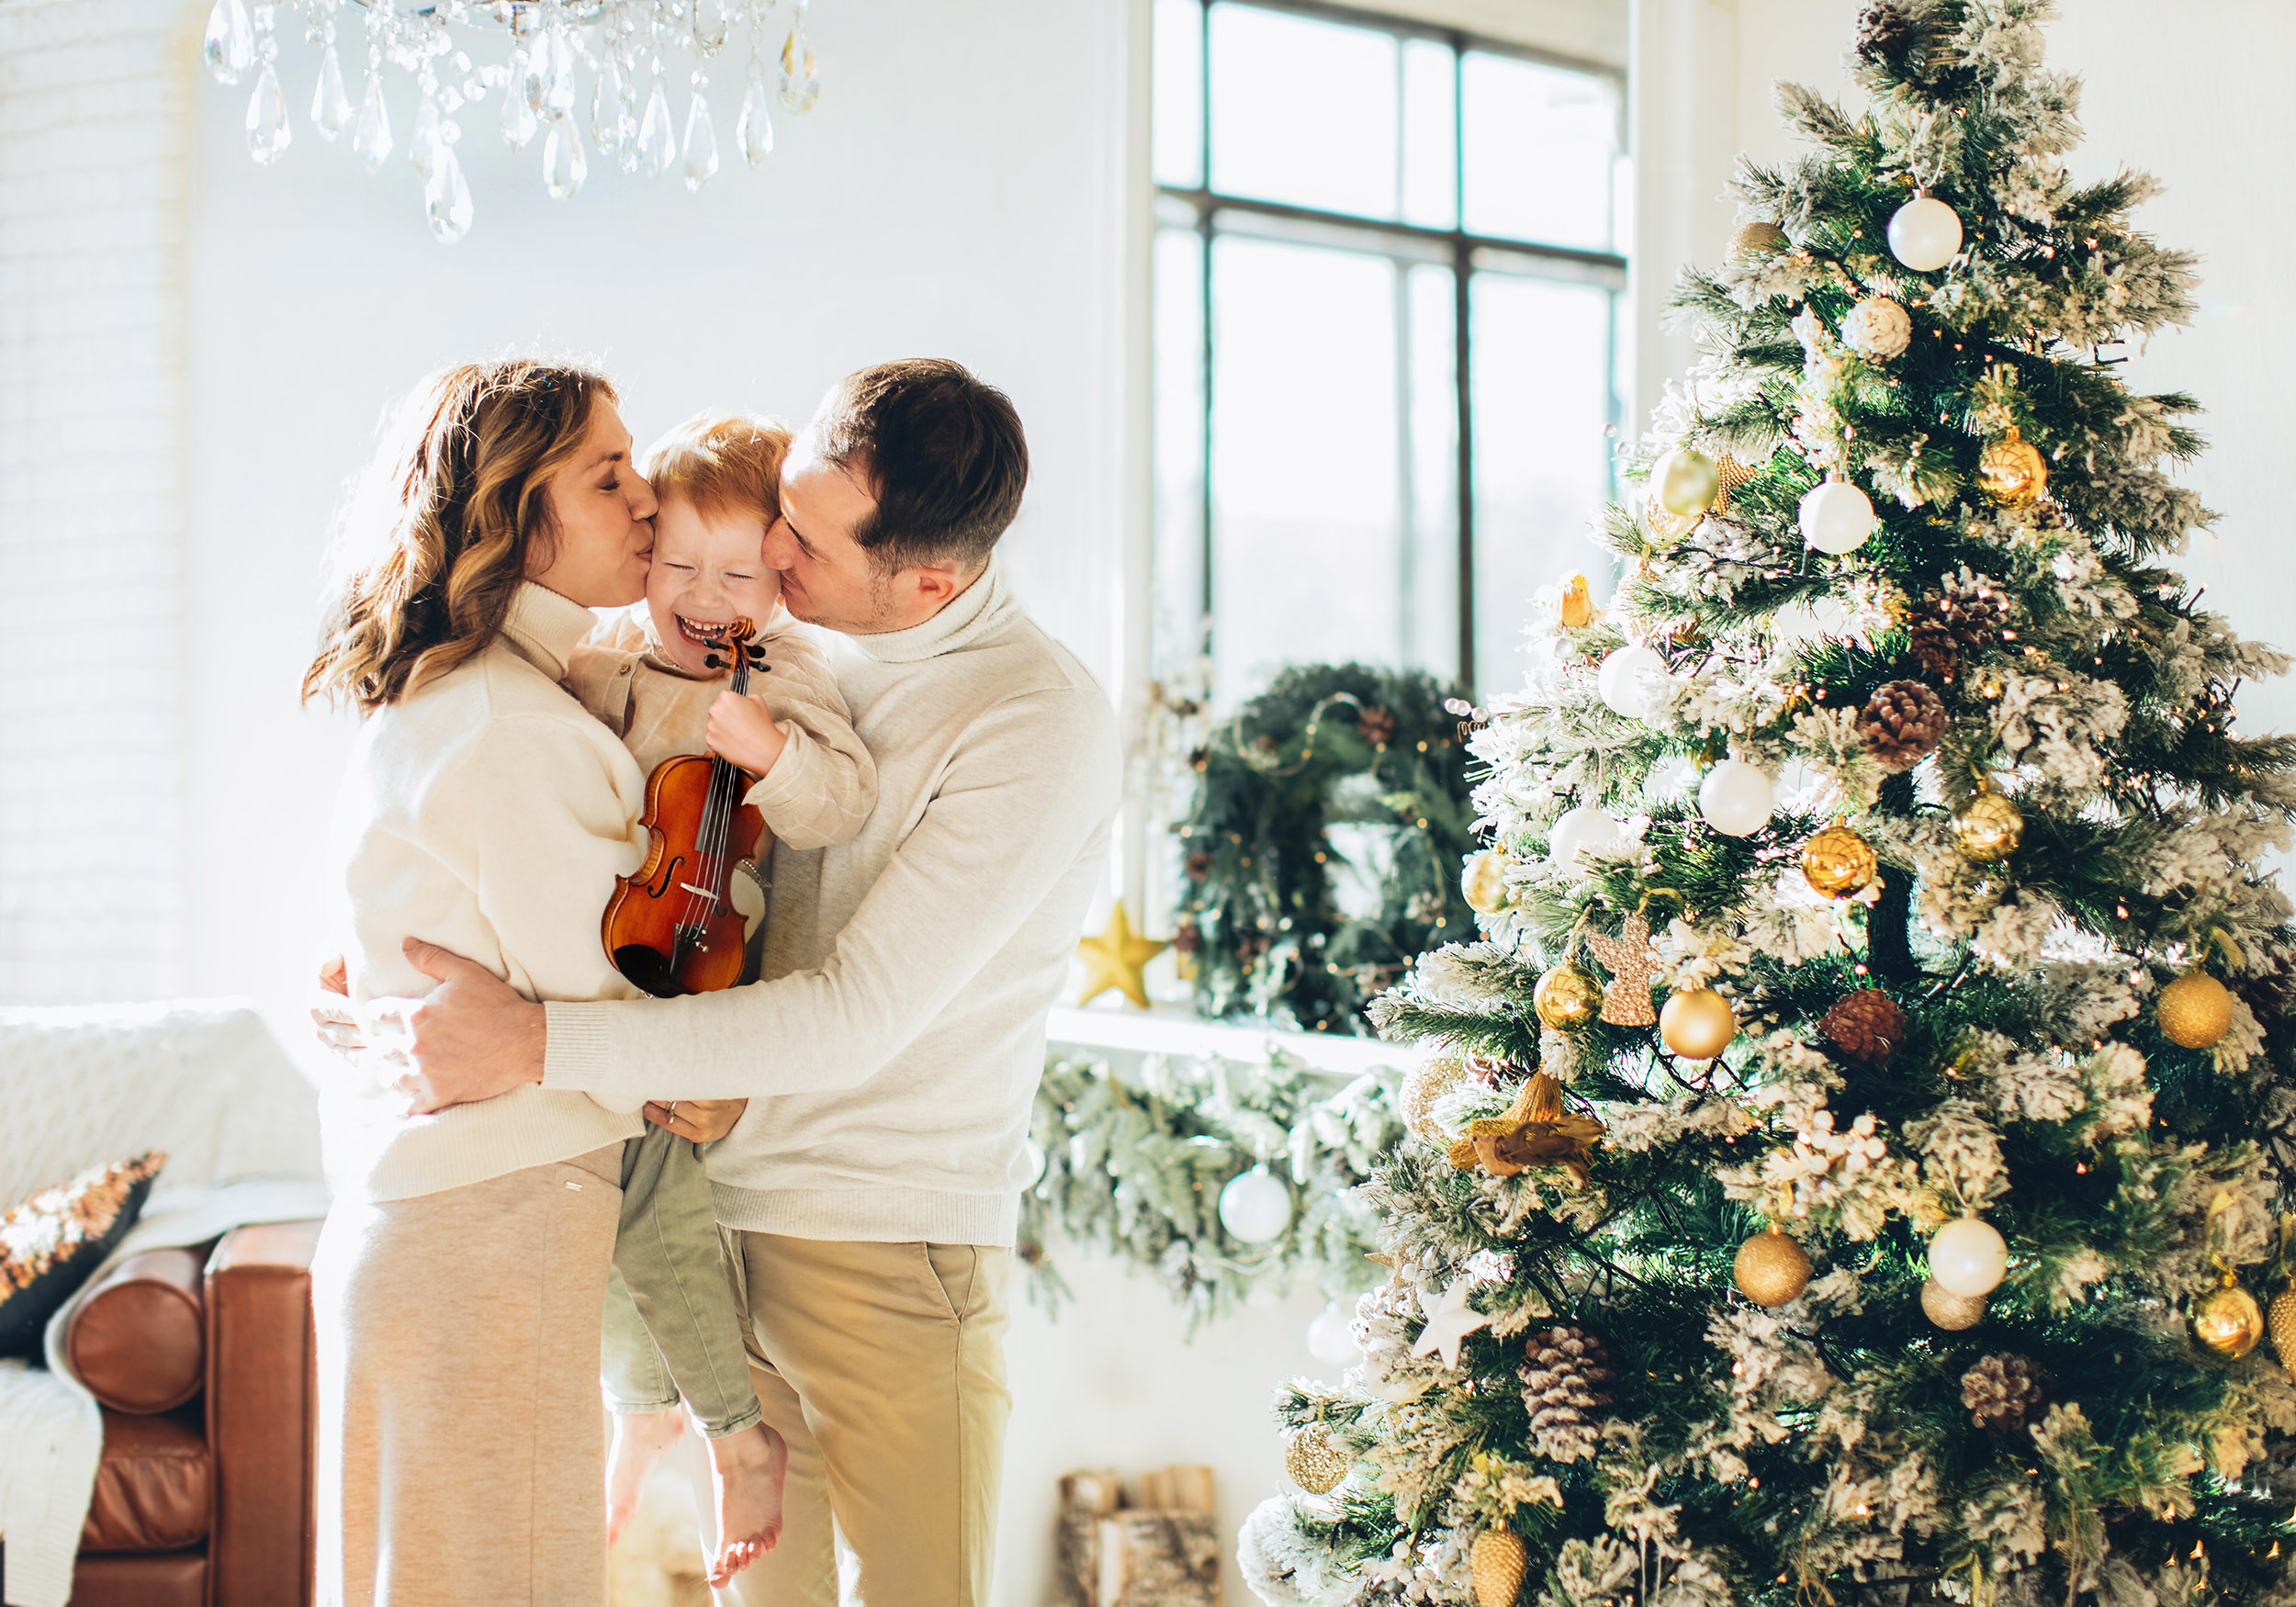 A mom and dad standing by a Christmas tree are holding and kissing their preschooler child while he smiles and holds his new violin